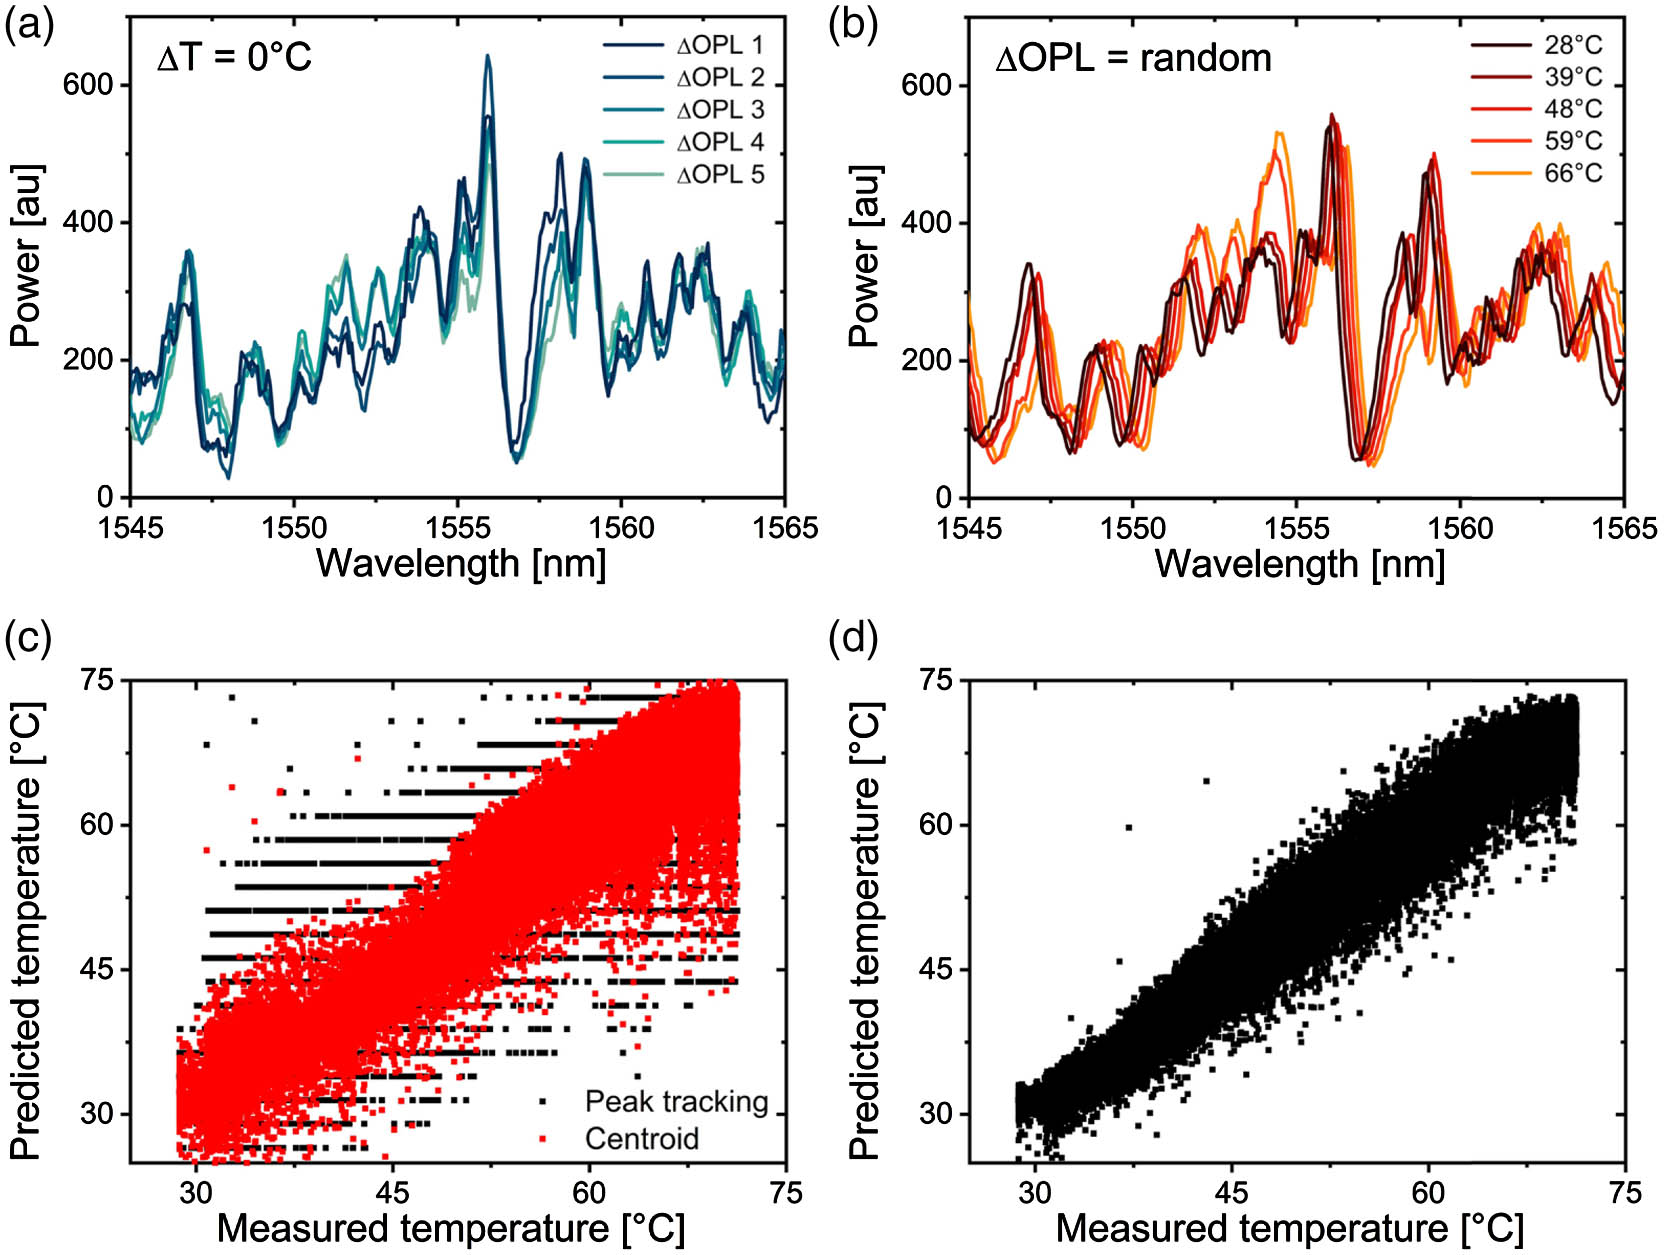 Complex cross-sensitivity problem in specific measurement with MMF-based sensors under OPL noise. (a) Transmission interference spectra from the SOF at a fixed temperature under white noise in OPL created by shaking the loosely mounted SOF. (b) Interference spectra at several temperatures under OPL noise. (c) Predicted (calibrated) temperature by peak tracking (black) and after applying a centroid function to improve the accuracy (red). (d) Predicted (calibrated) temperature obtained using a Fourier phase-shift technique. The measured temperature in (c) and (d) was obtained using a reference thermocouple.